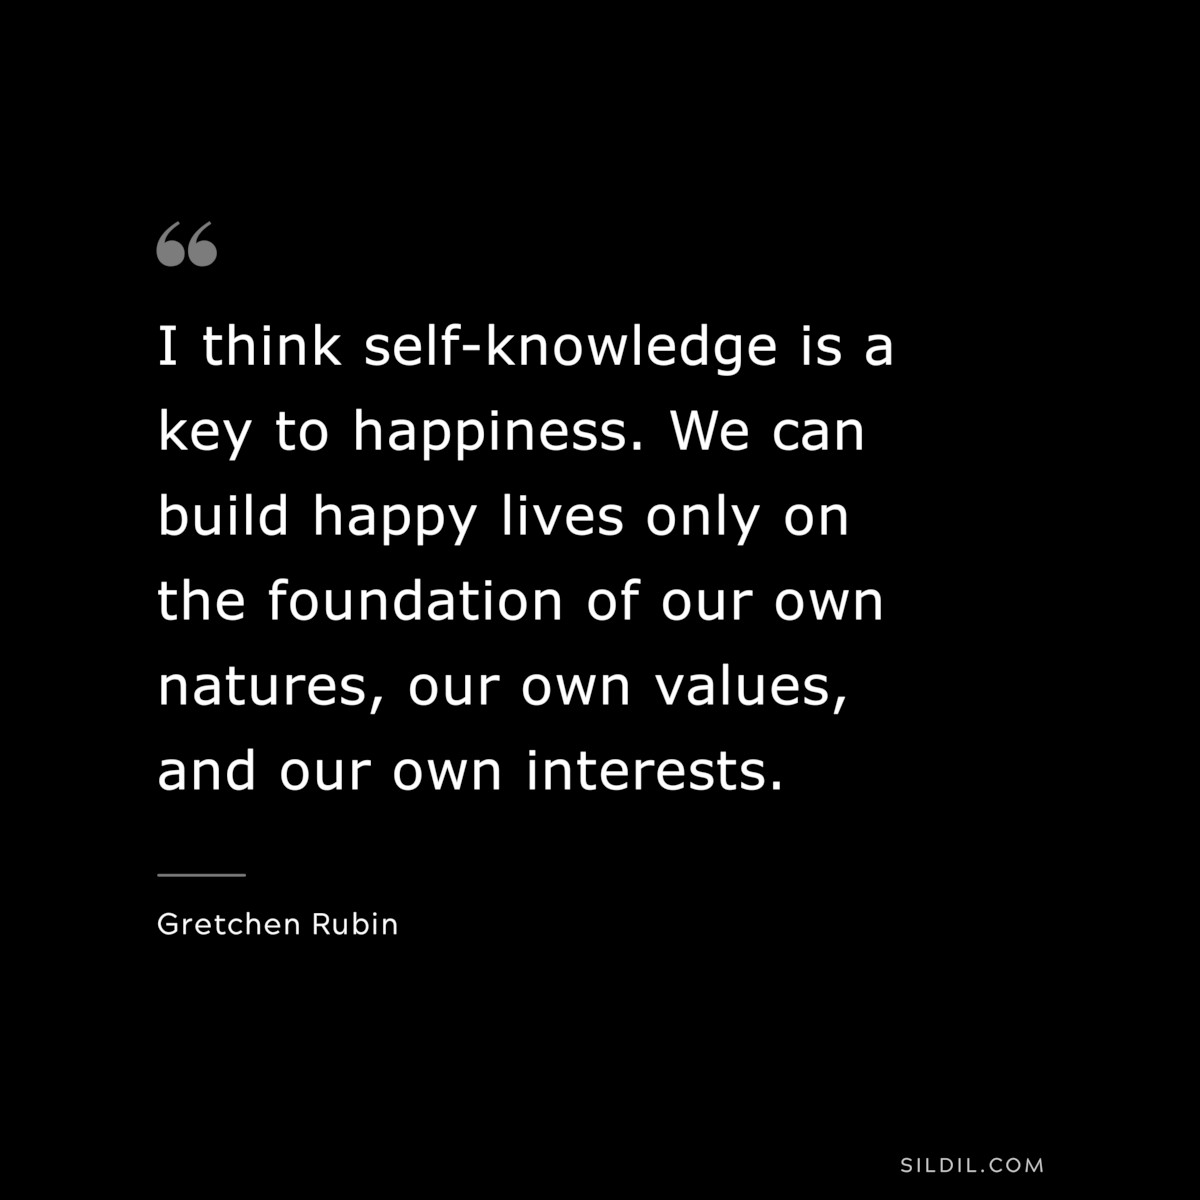 I think self-knowledge is a key to happiness. We can build happy lives only on the foundation of our own natures, our own values, and our own interests. ― Gretchen Rubin